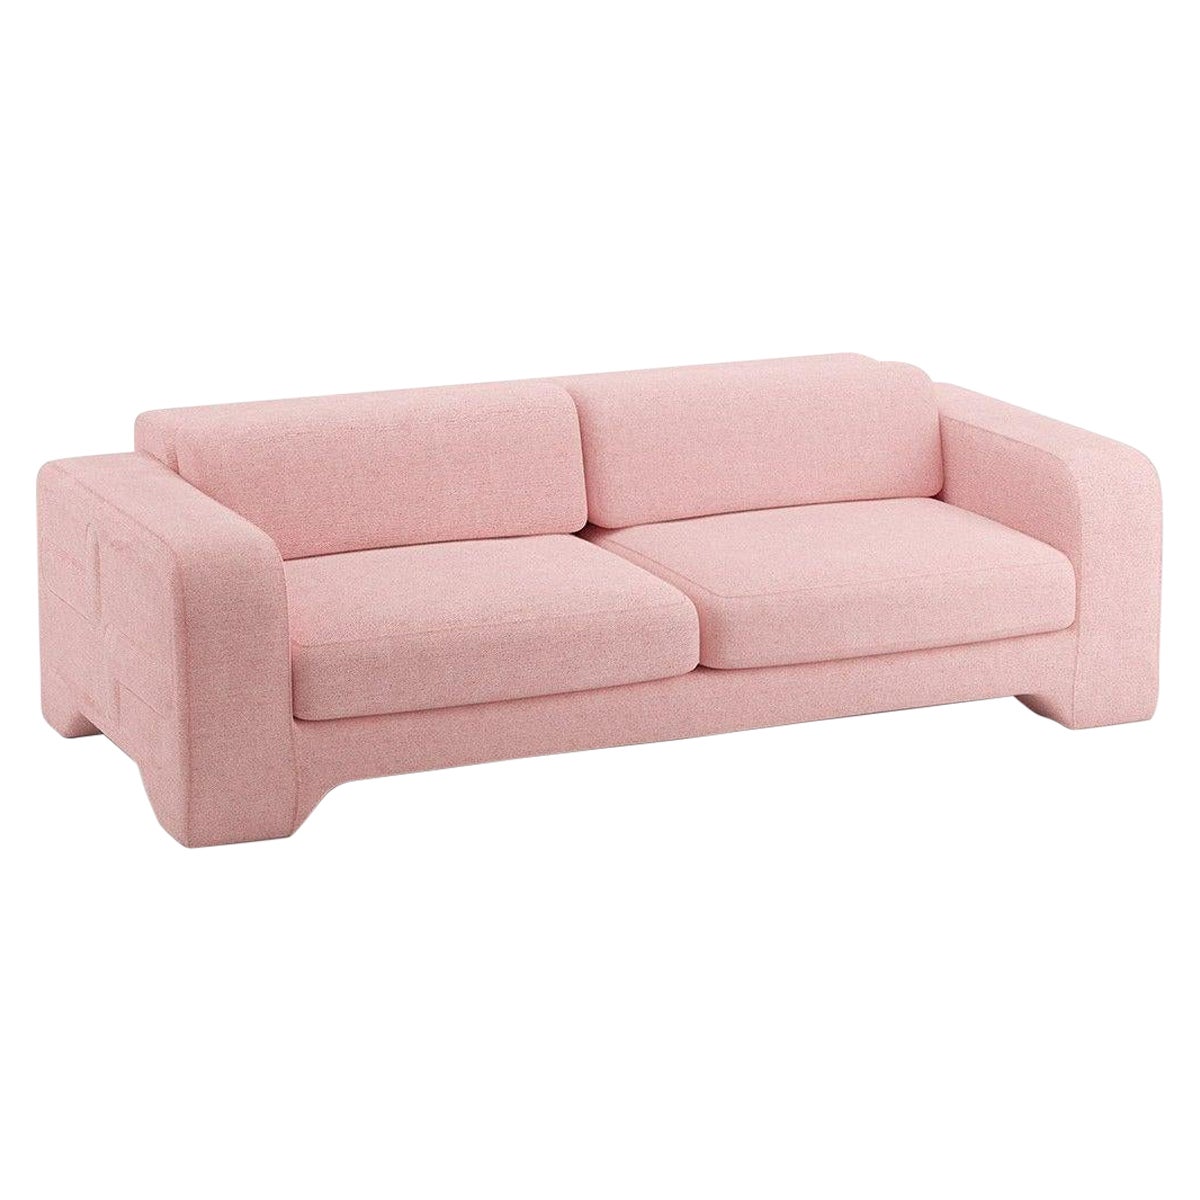 Popus Editions Giovanna 4 Seater Sofa in Pink Megeve Fabric with Knit Effect